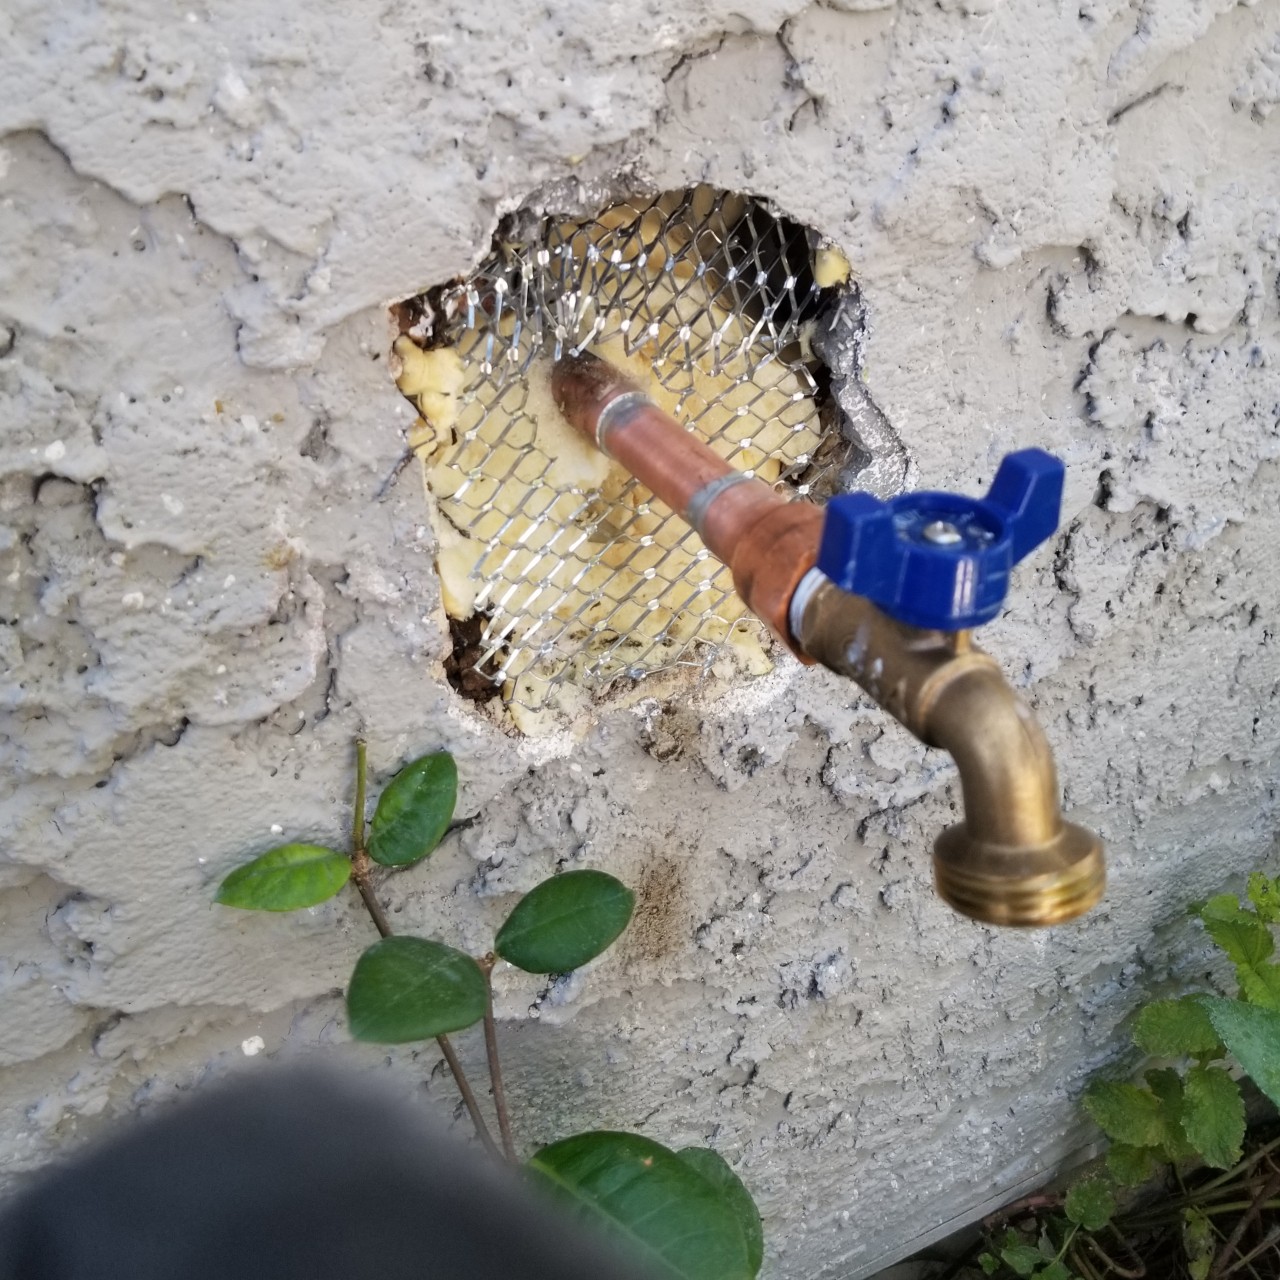 Polishing and soldering a rusty, leaky water pipe